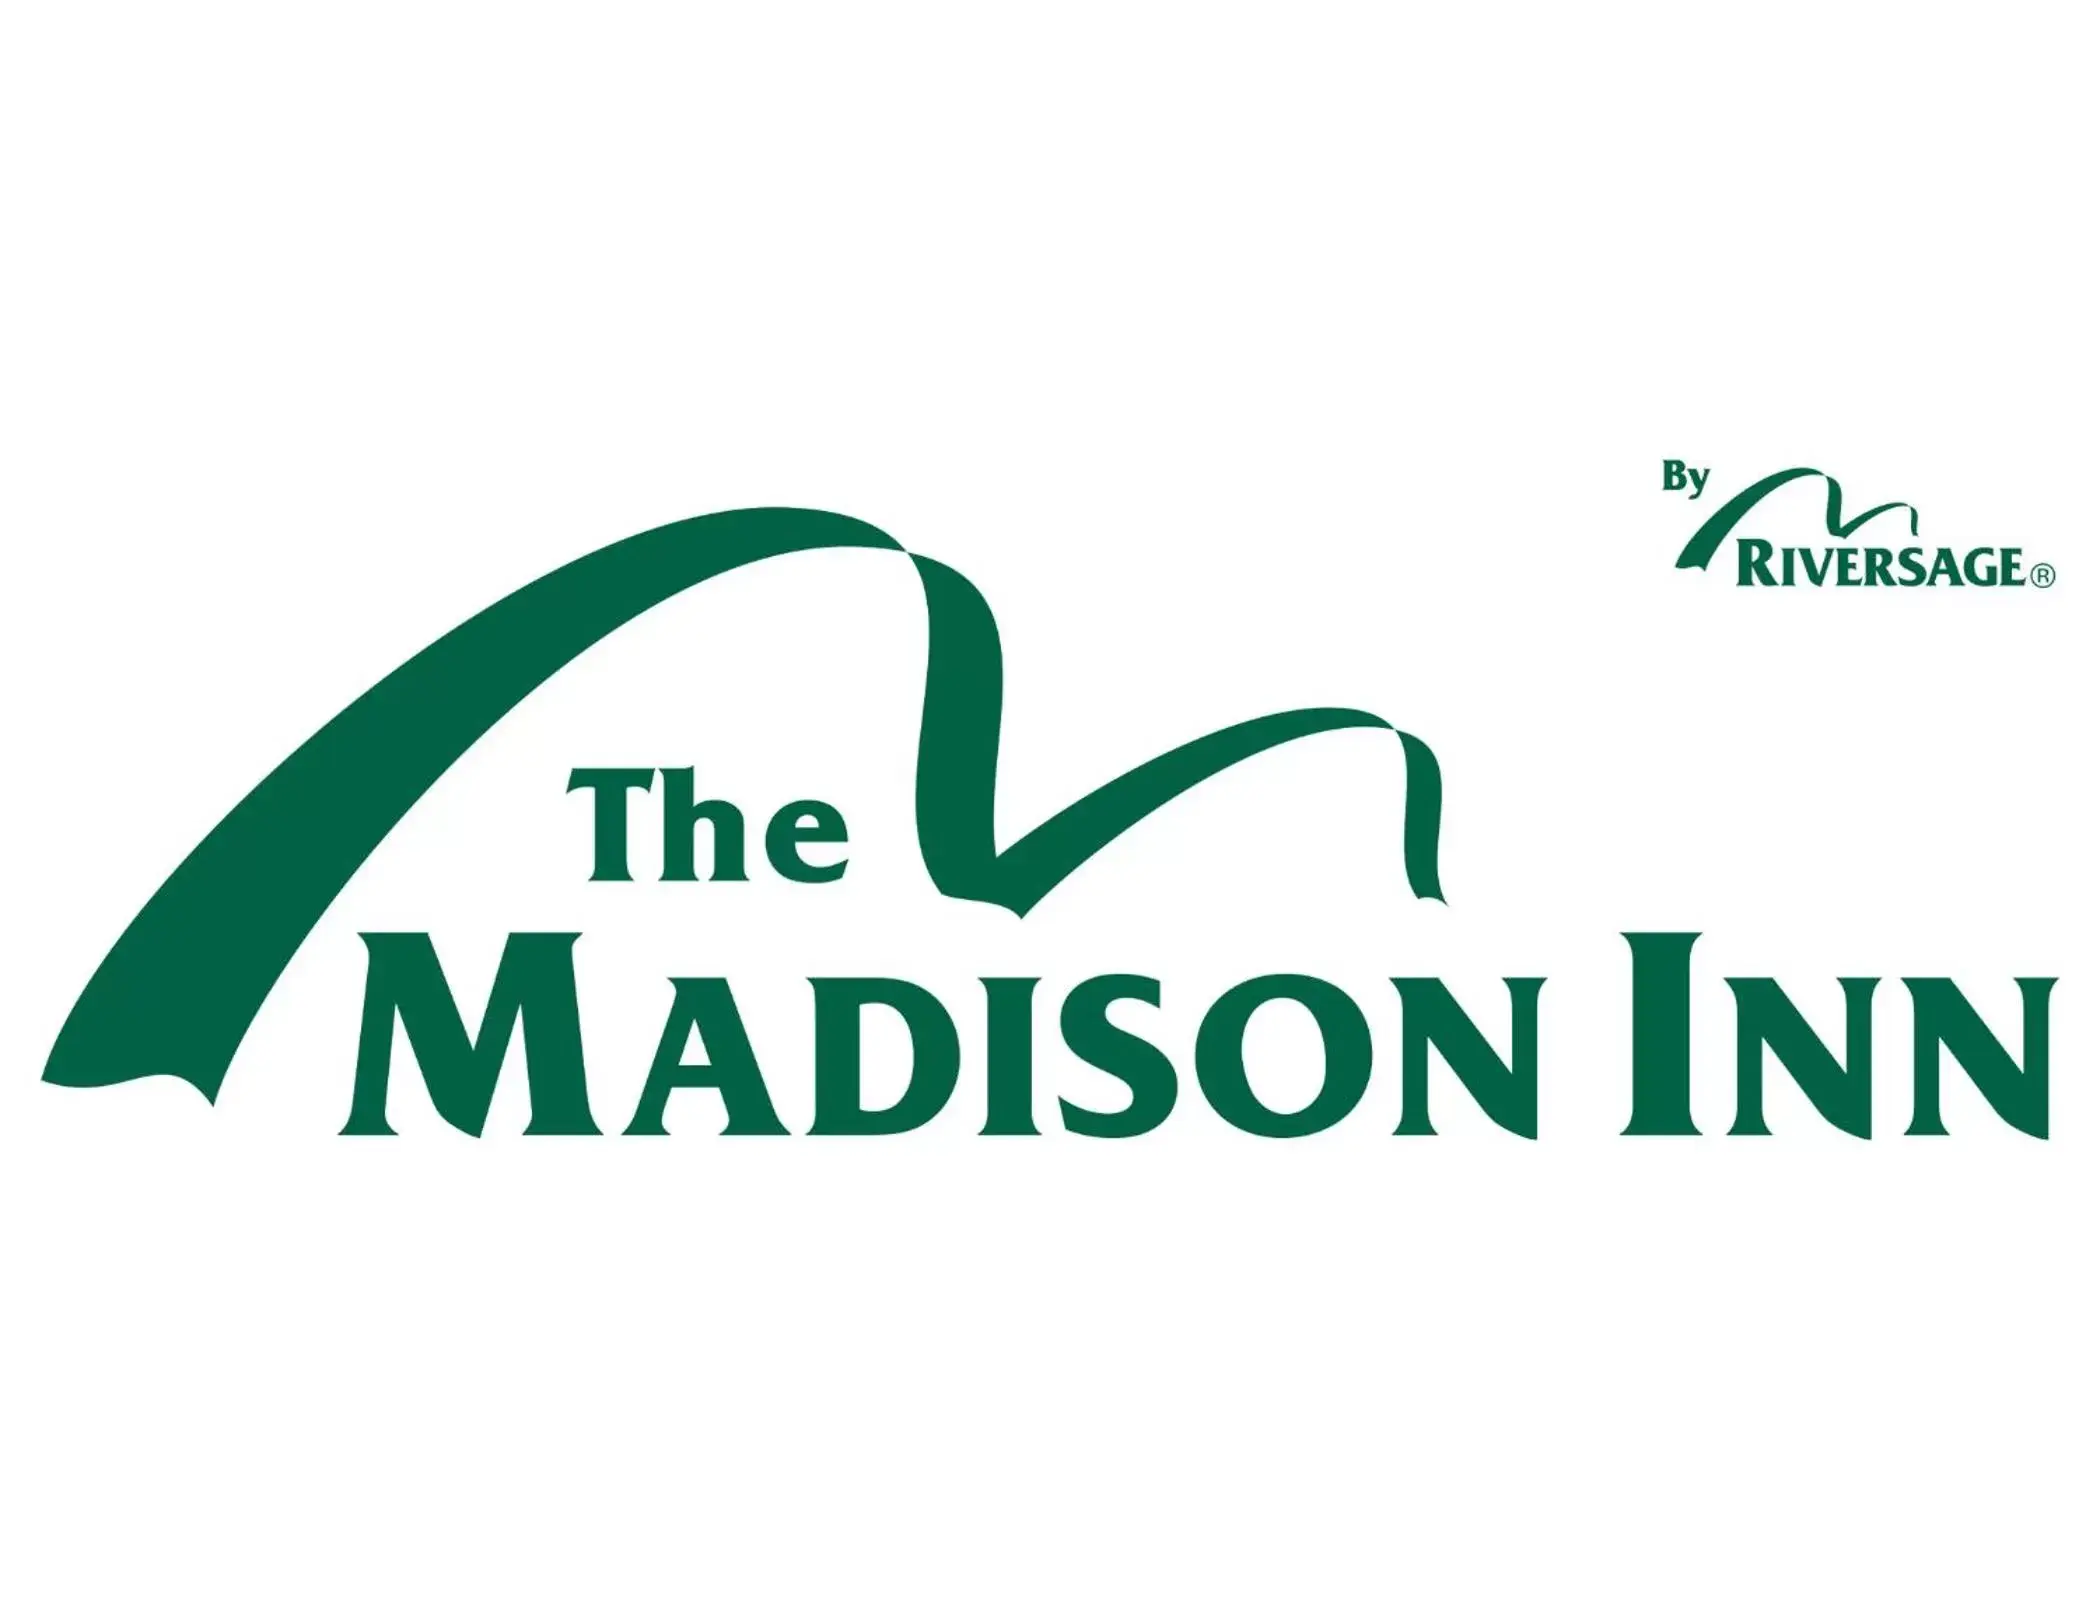 Property logo or sign in The Madison Inn by Riversage